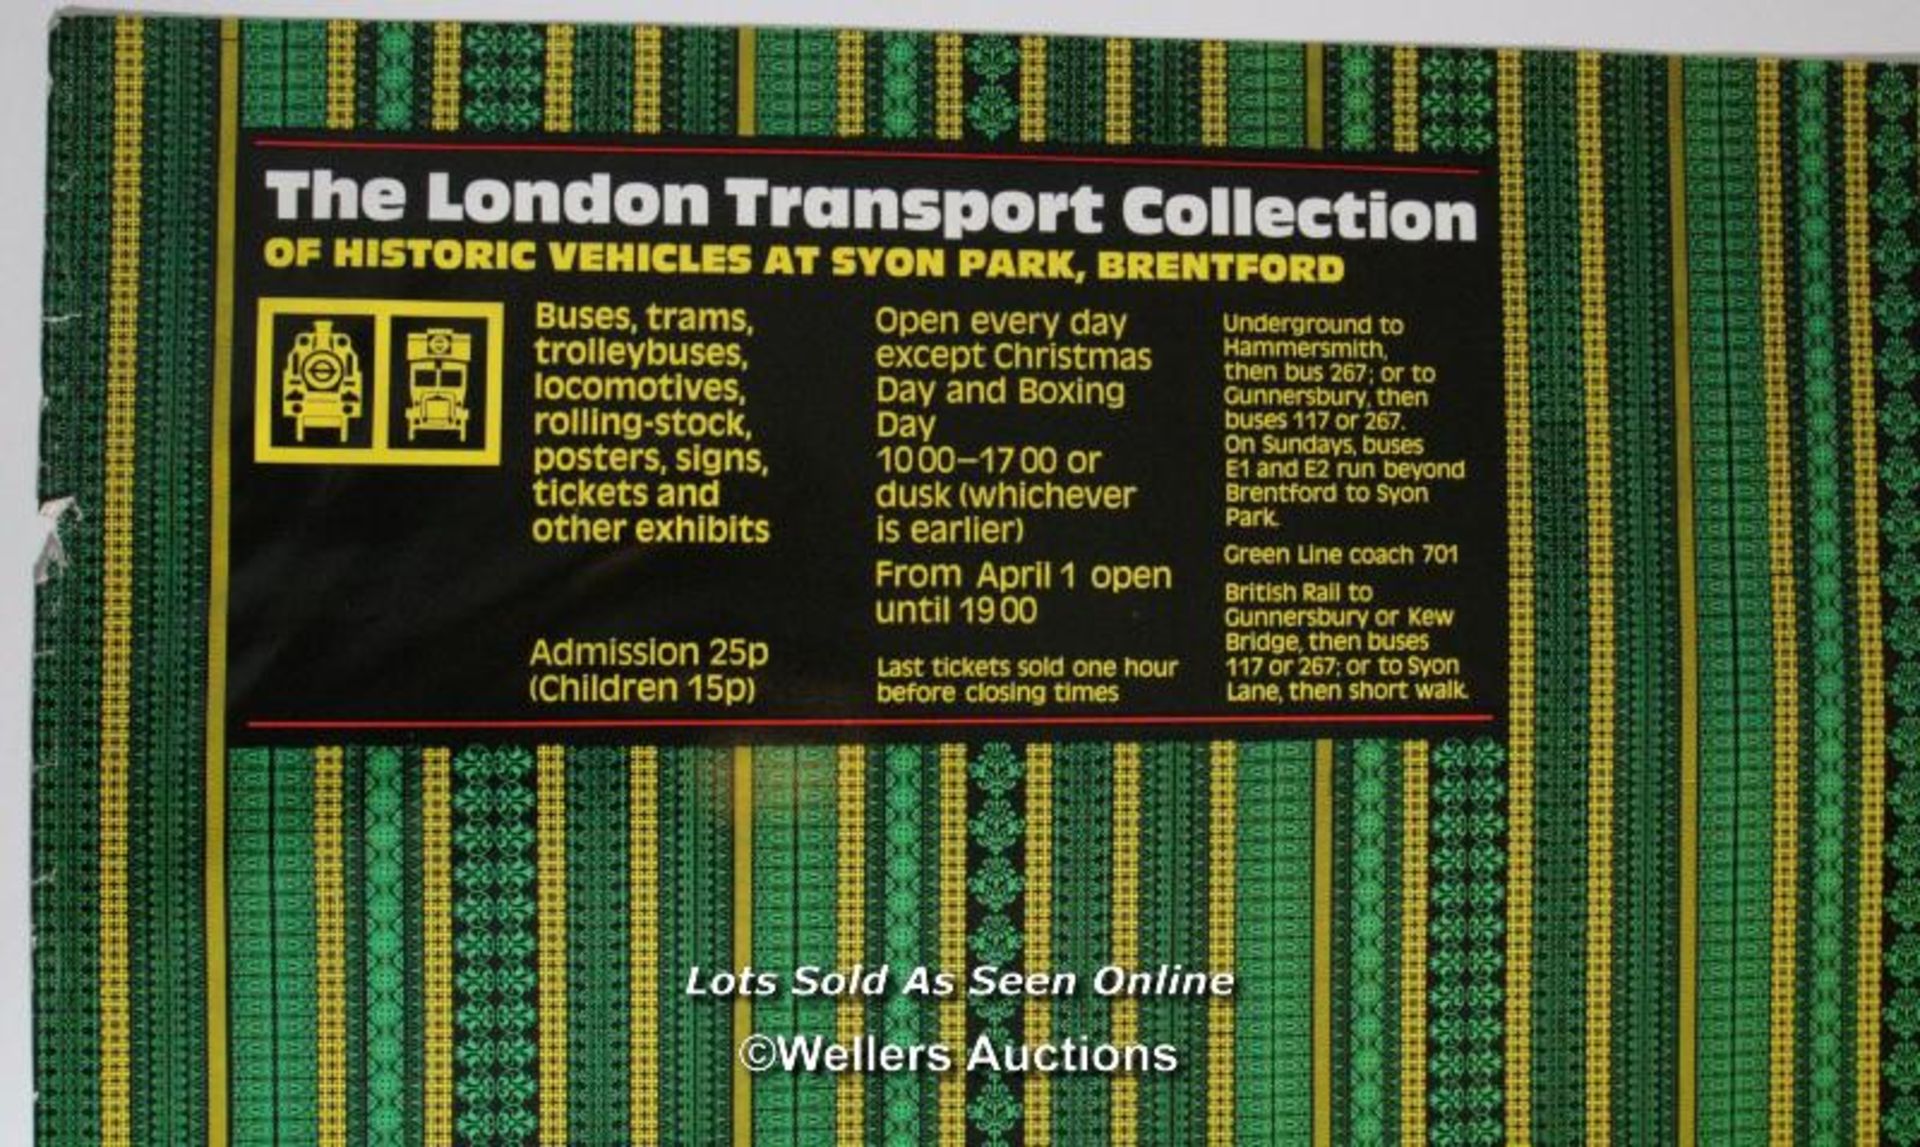 Original London Transport poster "The London Transport Collection" c1970s - Image 4 of 4